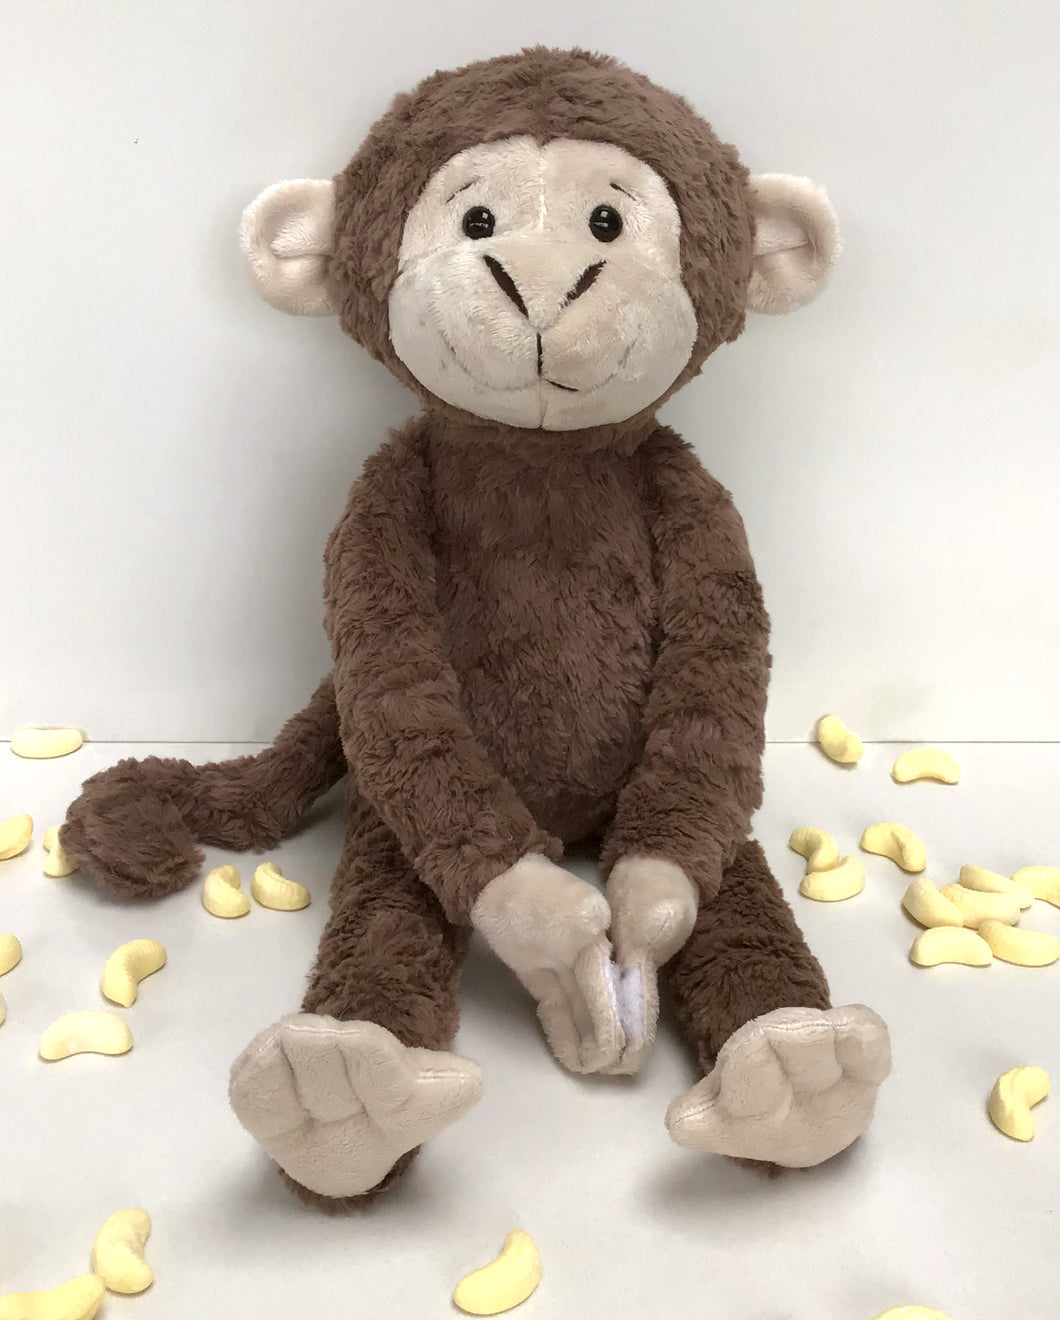 Hand made soft toy monkey made with super soft plush fur.